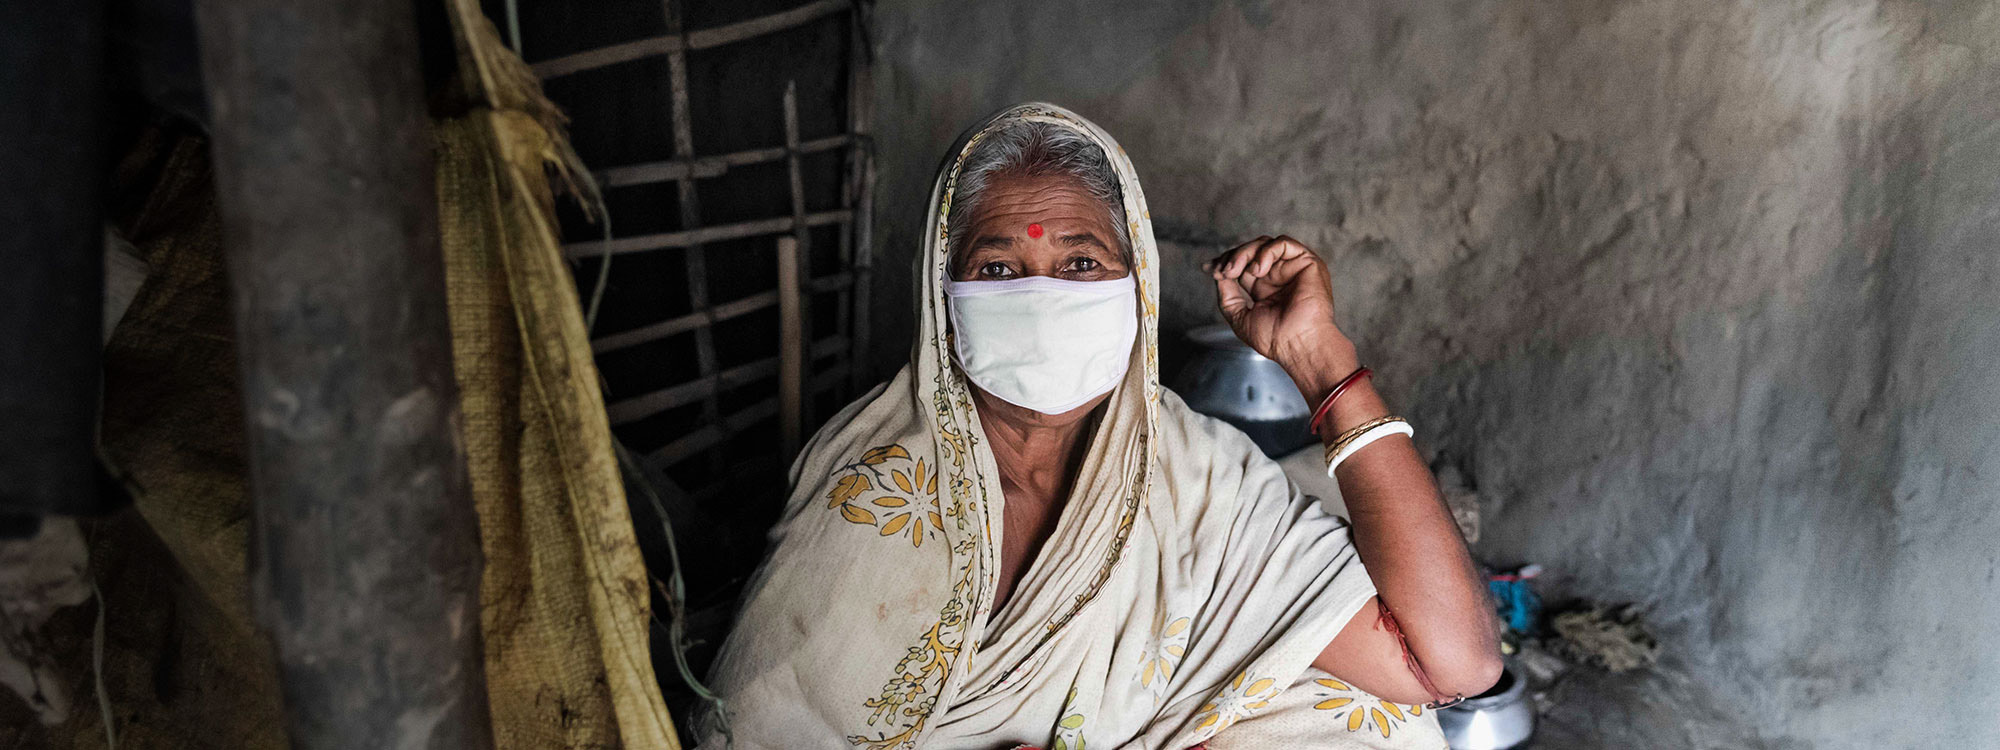 Woman wearing a face mask in India during the coronavirus pandemic